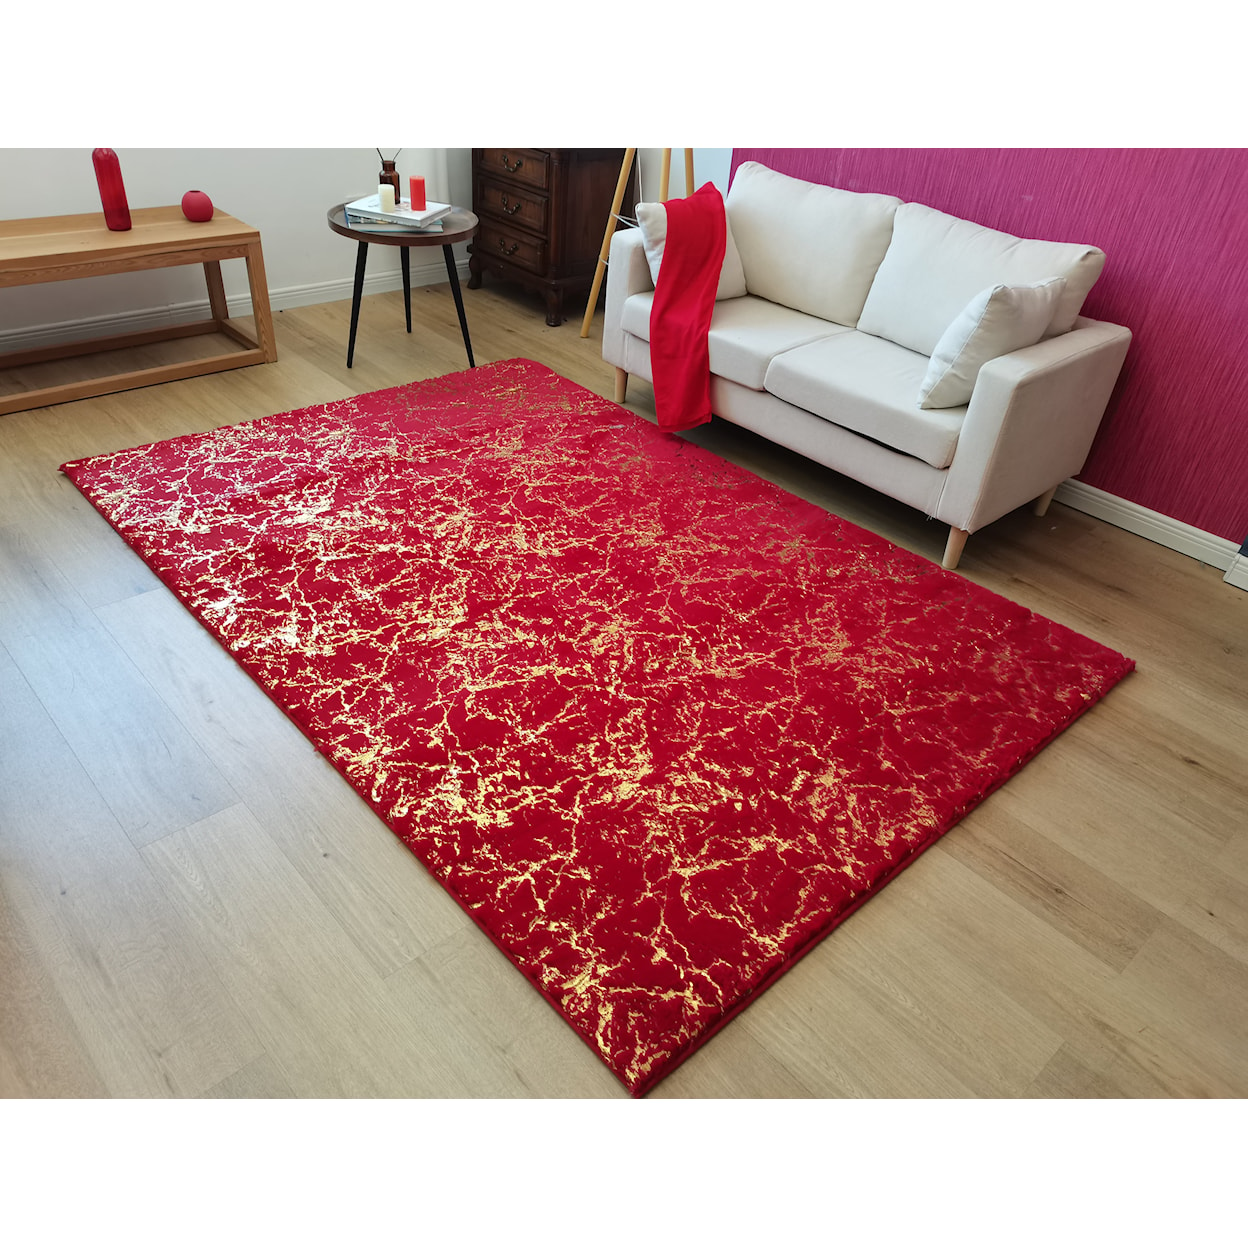 Zinatex Timmy Shaggy S Edition RED GOLD 5X8 AREA RUG |